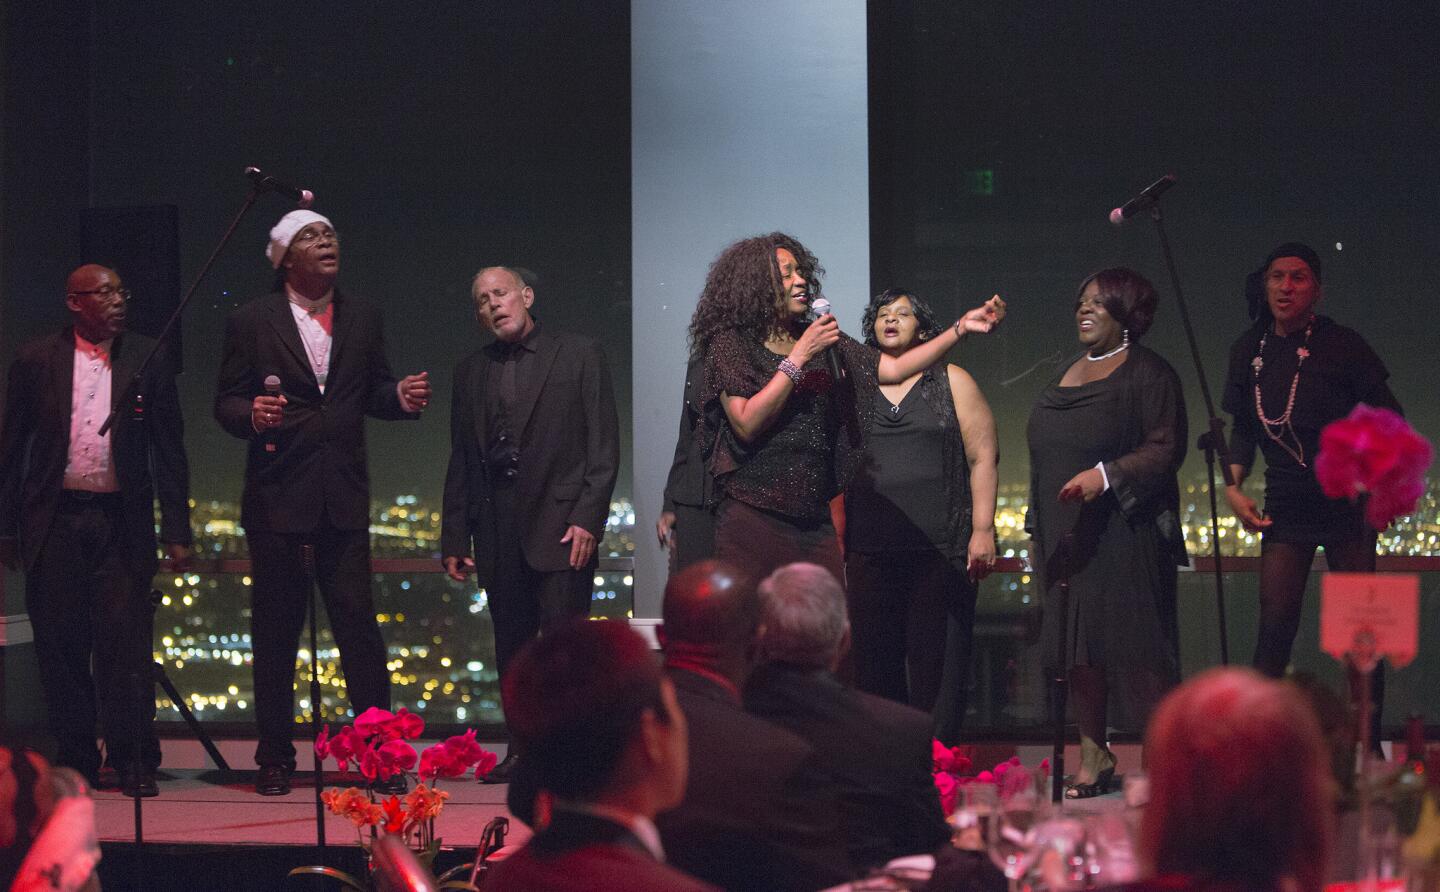 A choir made up of singers from skid row performs during a gala at the City Club in Los Angeles.